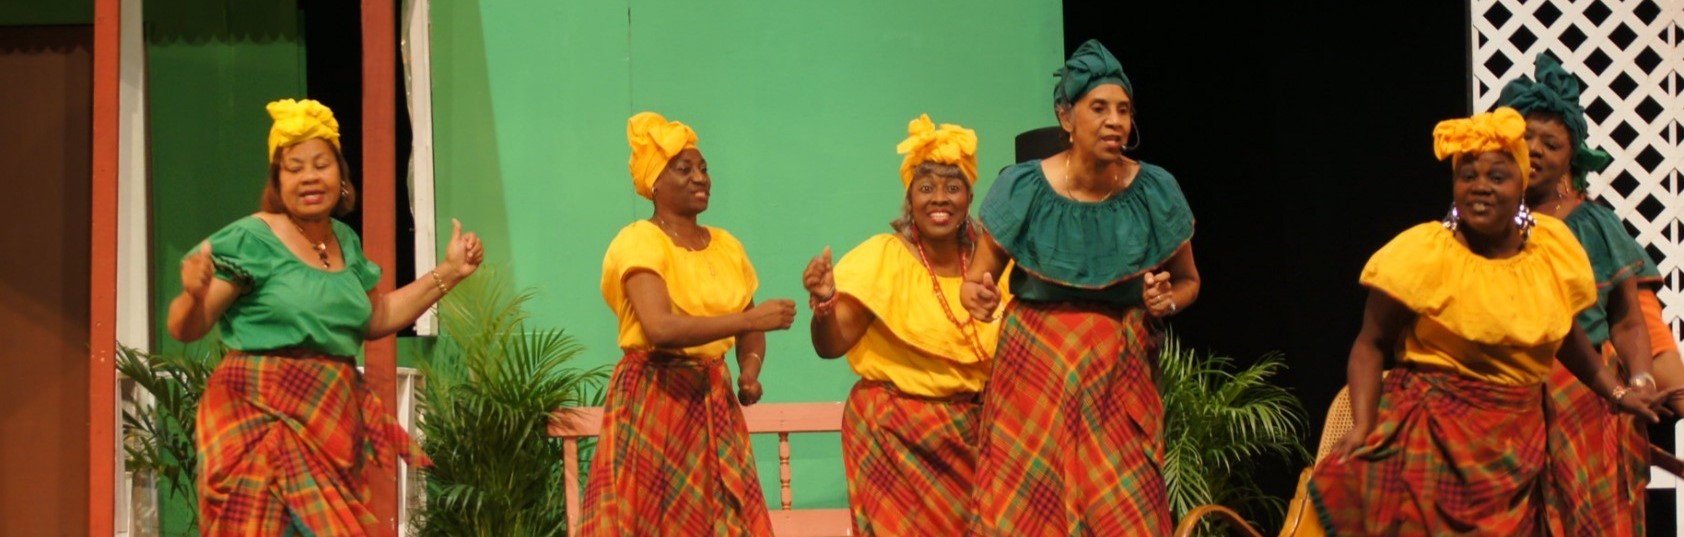 Louise Bennett-Coverley Heritage Council to stage Jamaican Pantomime 'Ol'  Time Sinting Come Back Again' at Lauderhill Performing Arts Center -  Caribbean Riddims